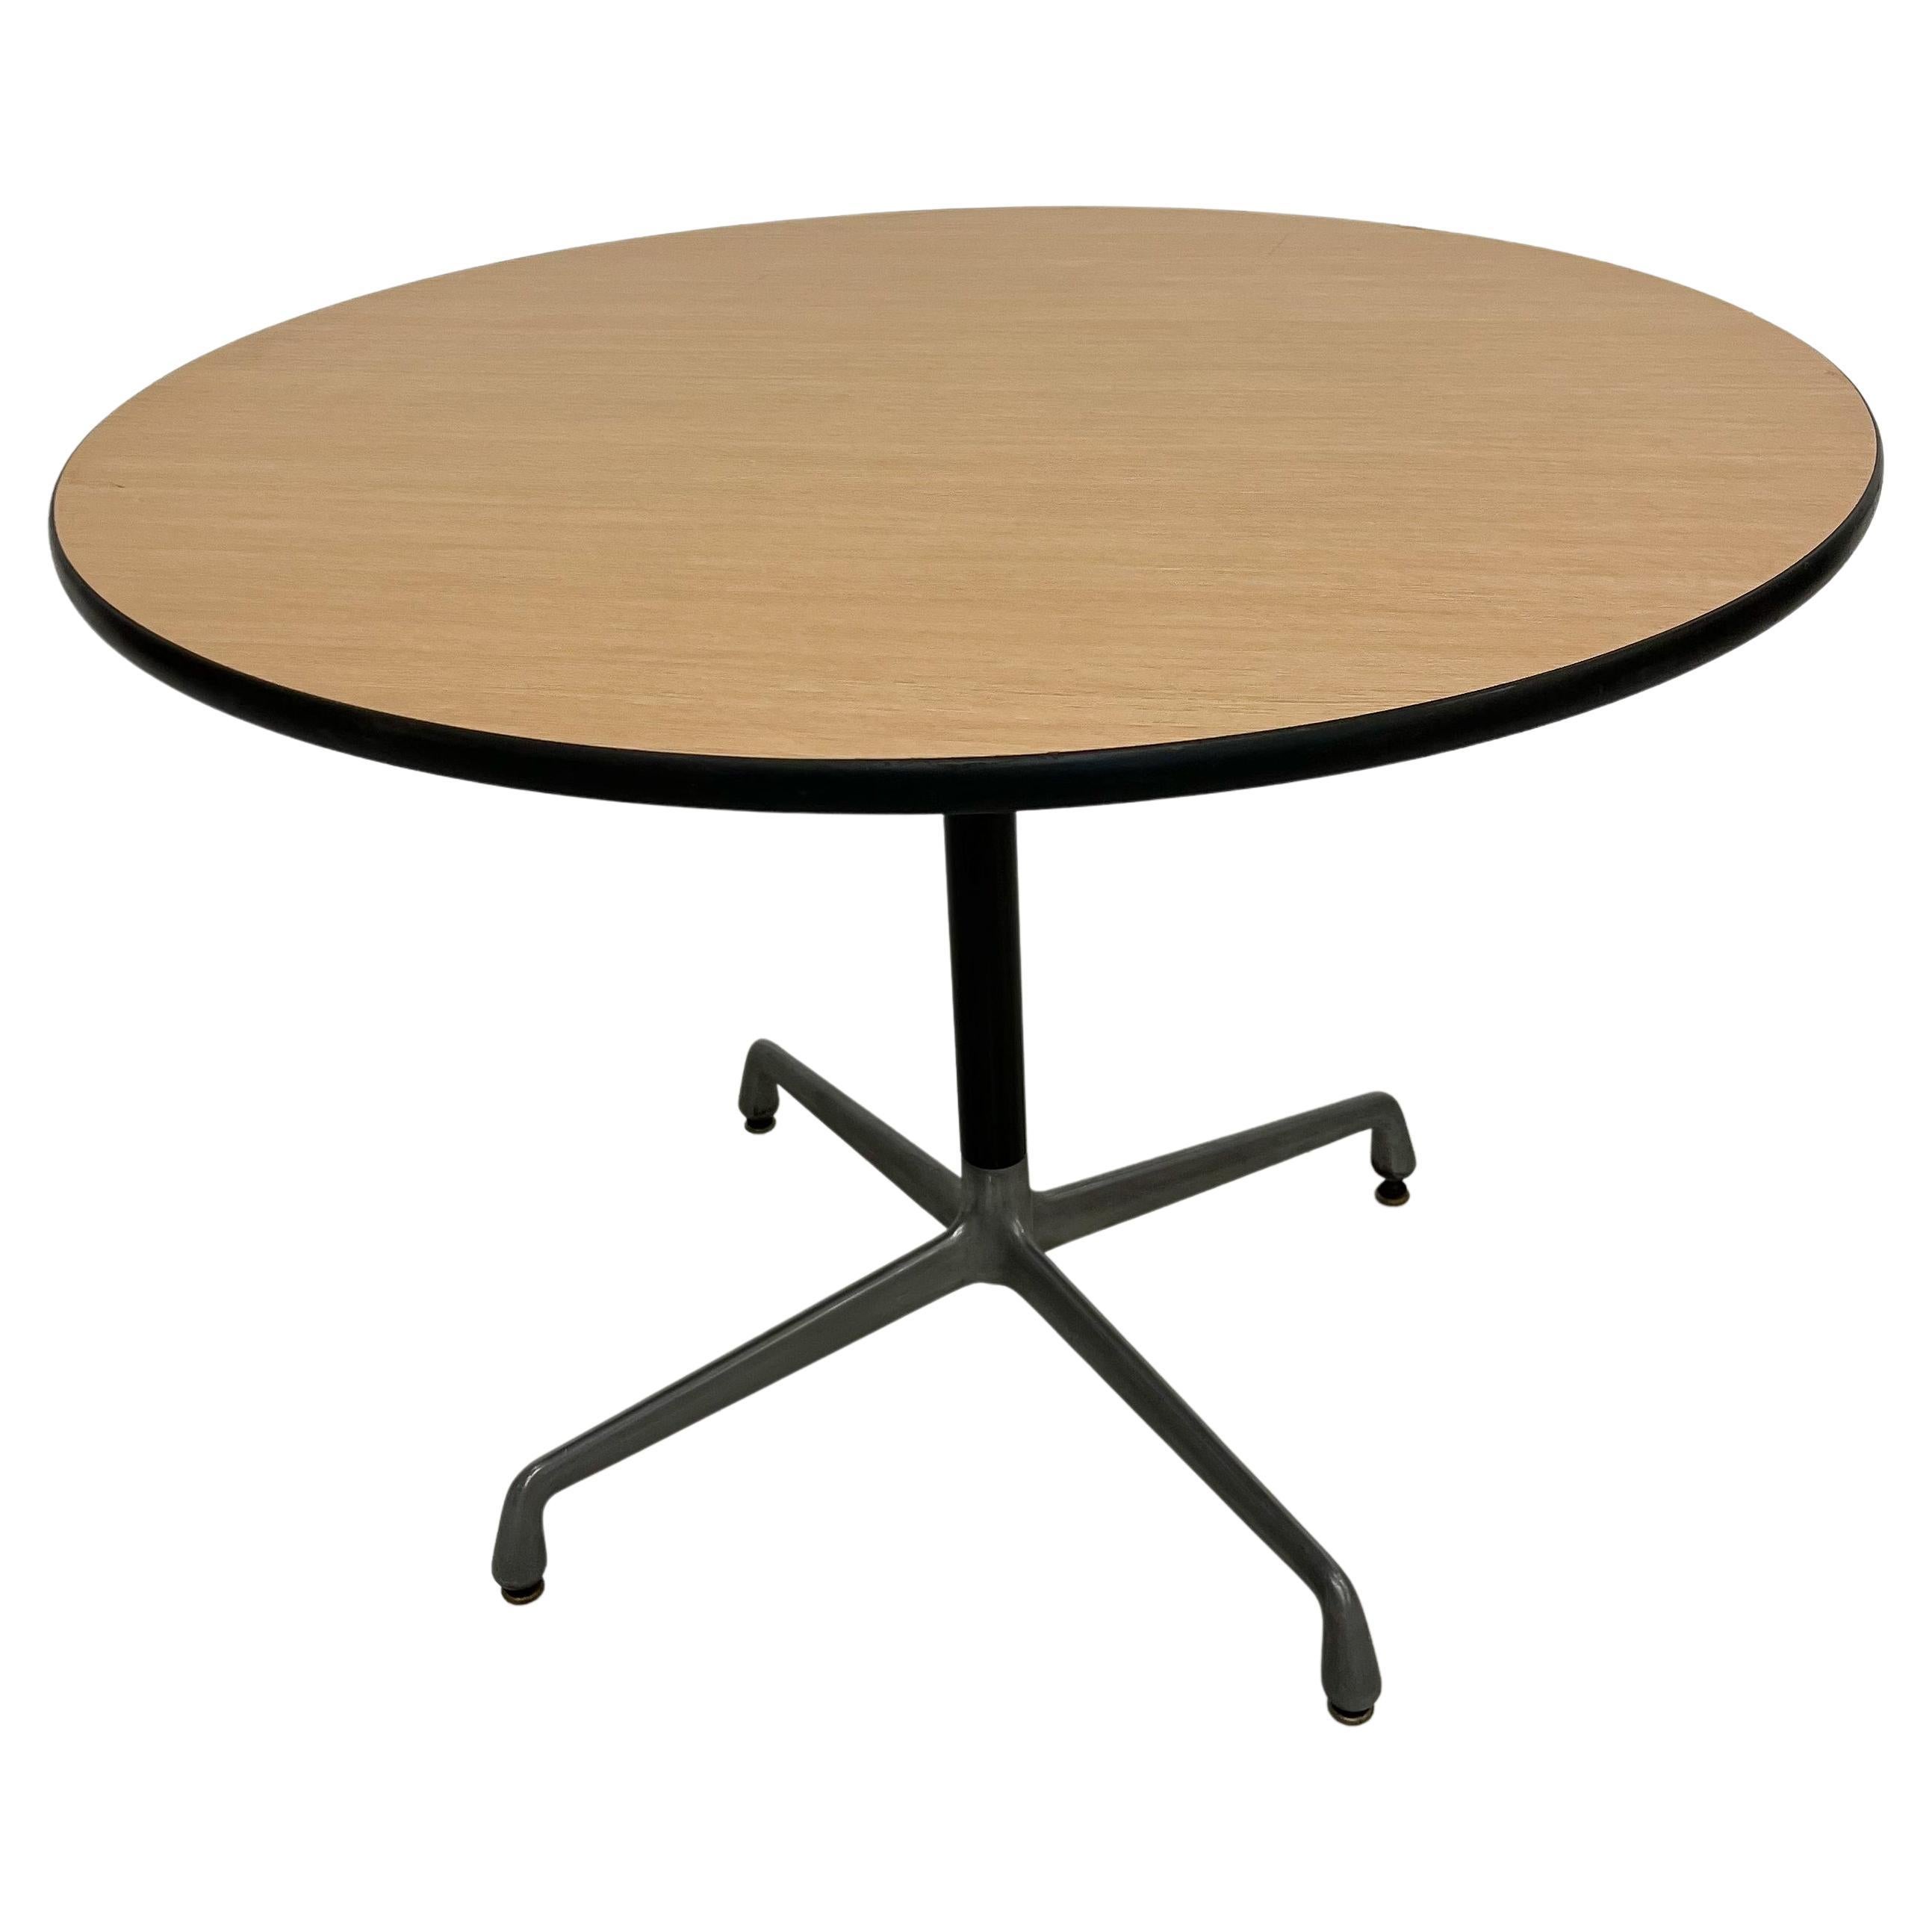 1980s Charles & Ray Eames Table by Herman Miller Aluminum Group